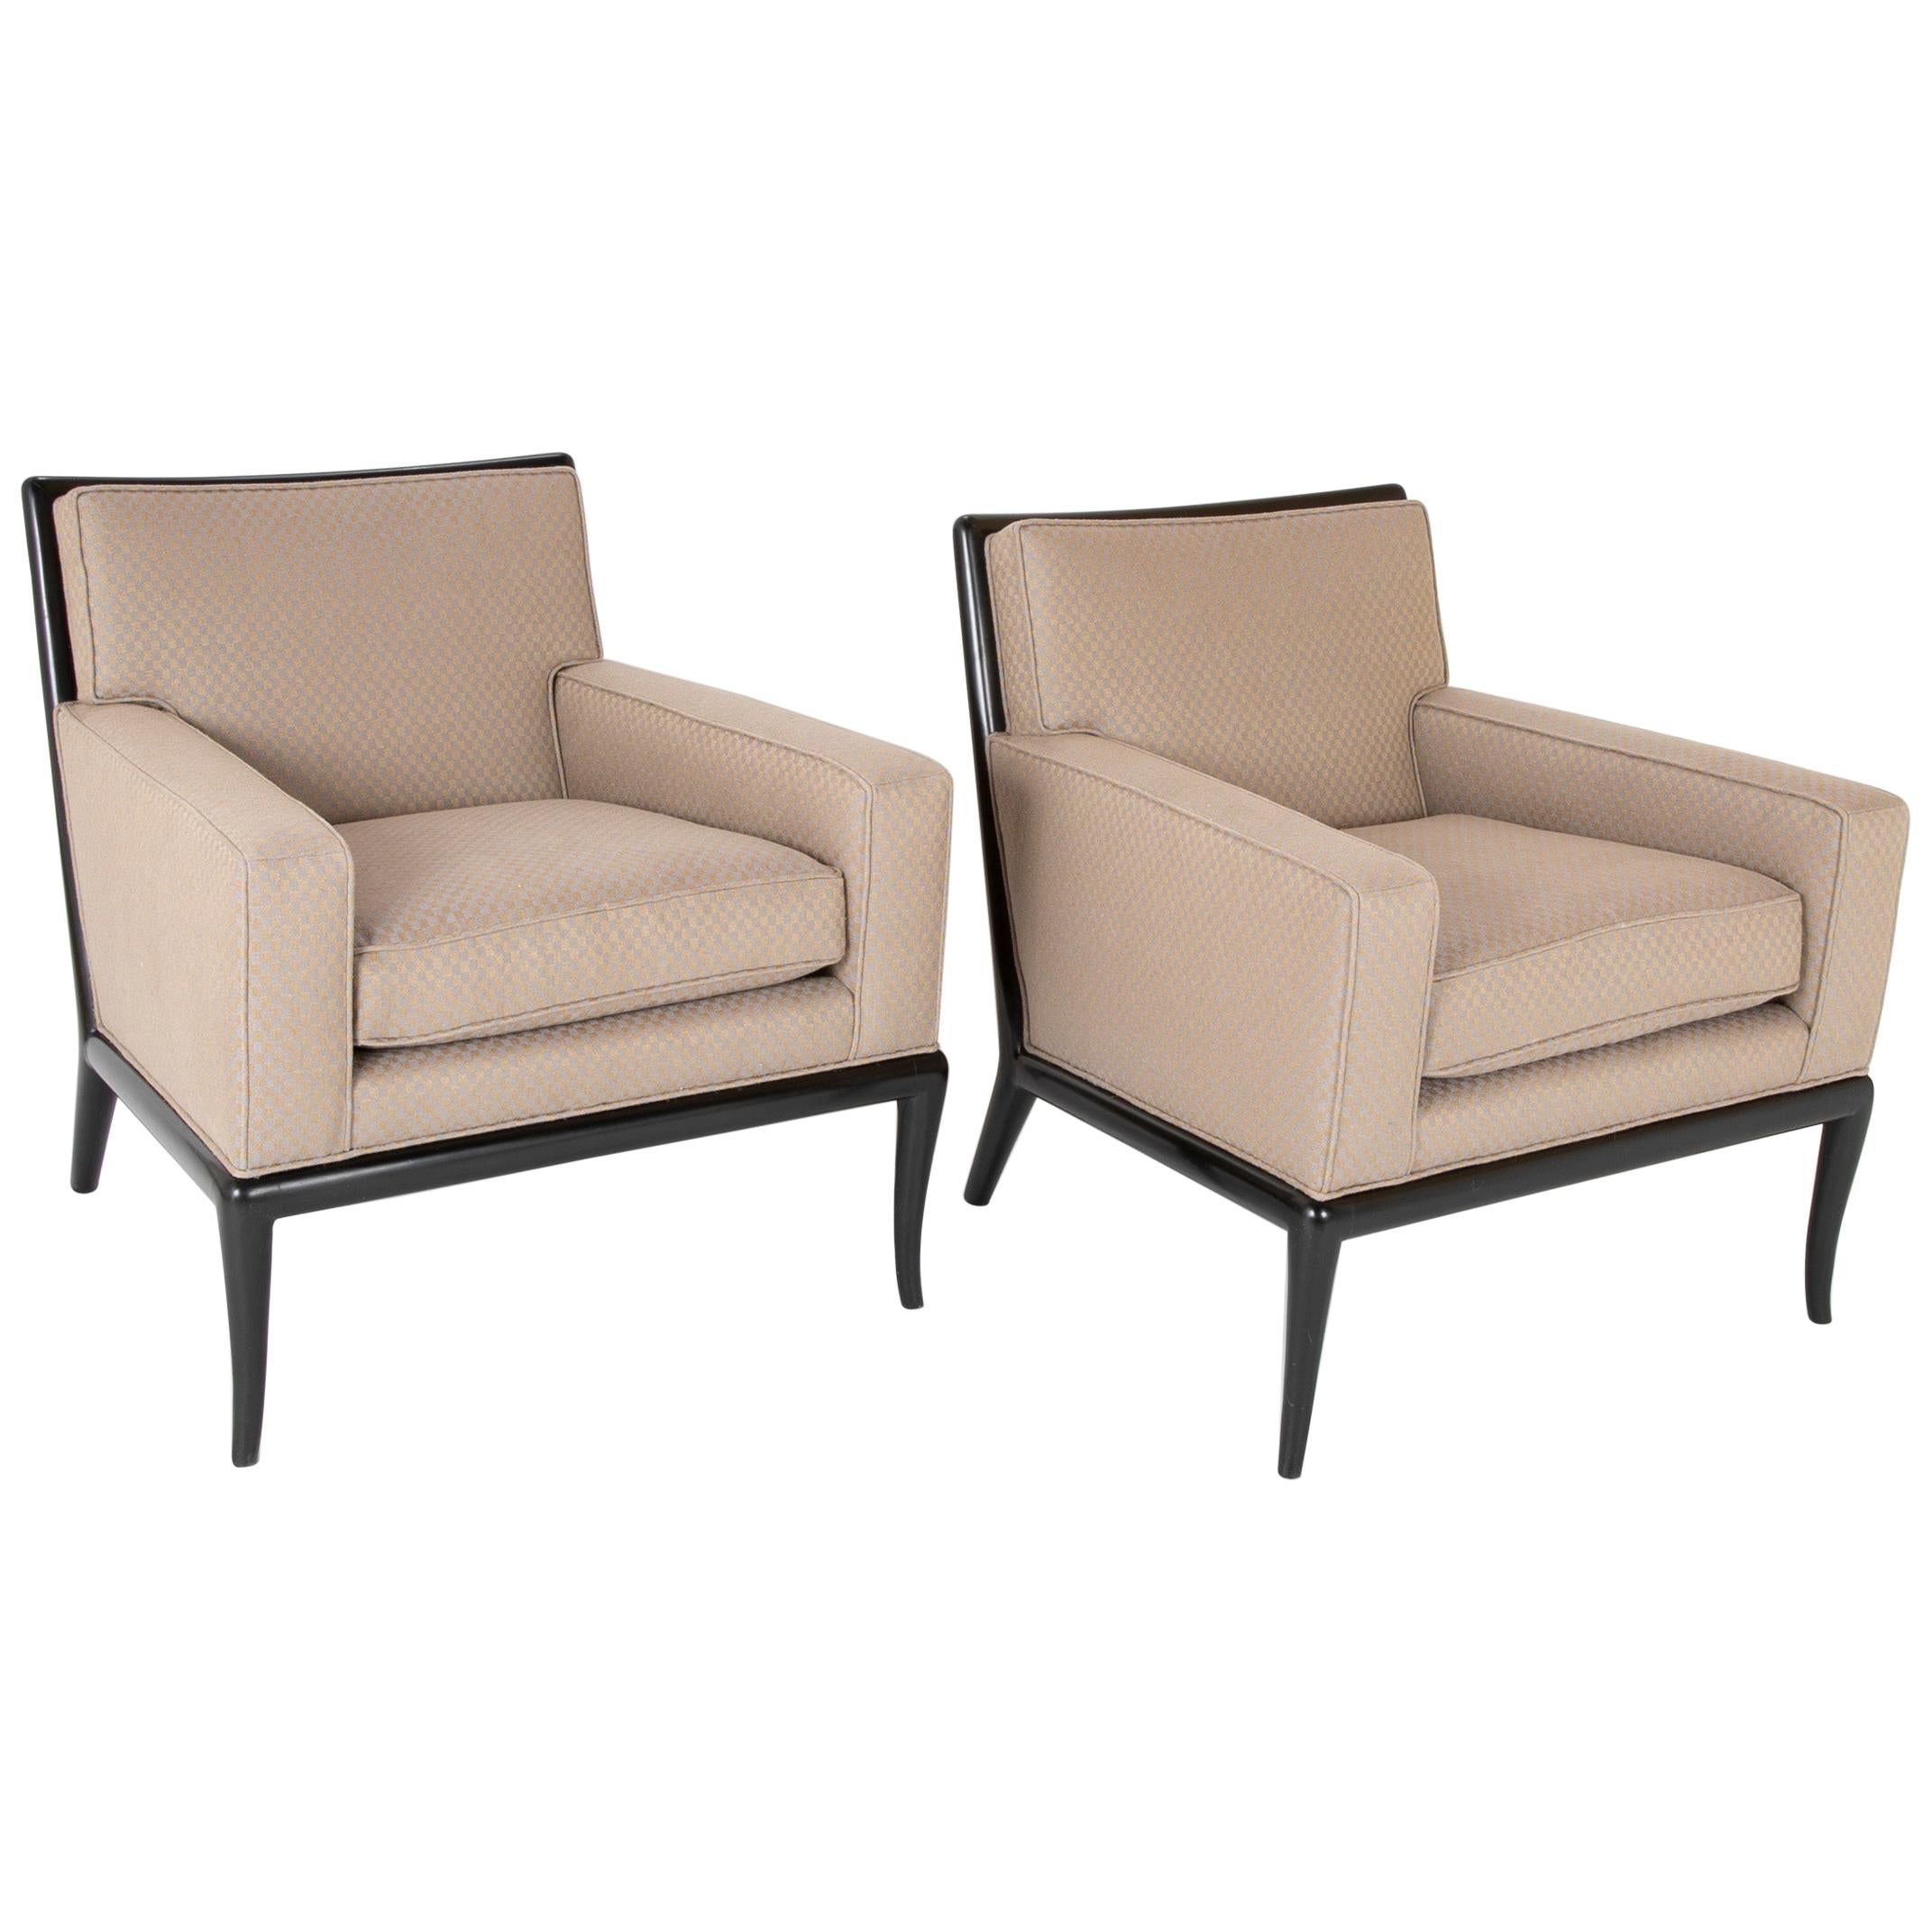 Pair of Ebonized T.H. Robsjohn Gibbings Armchairs with Flared Front Legs